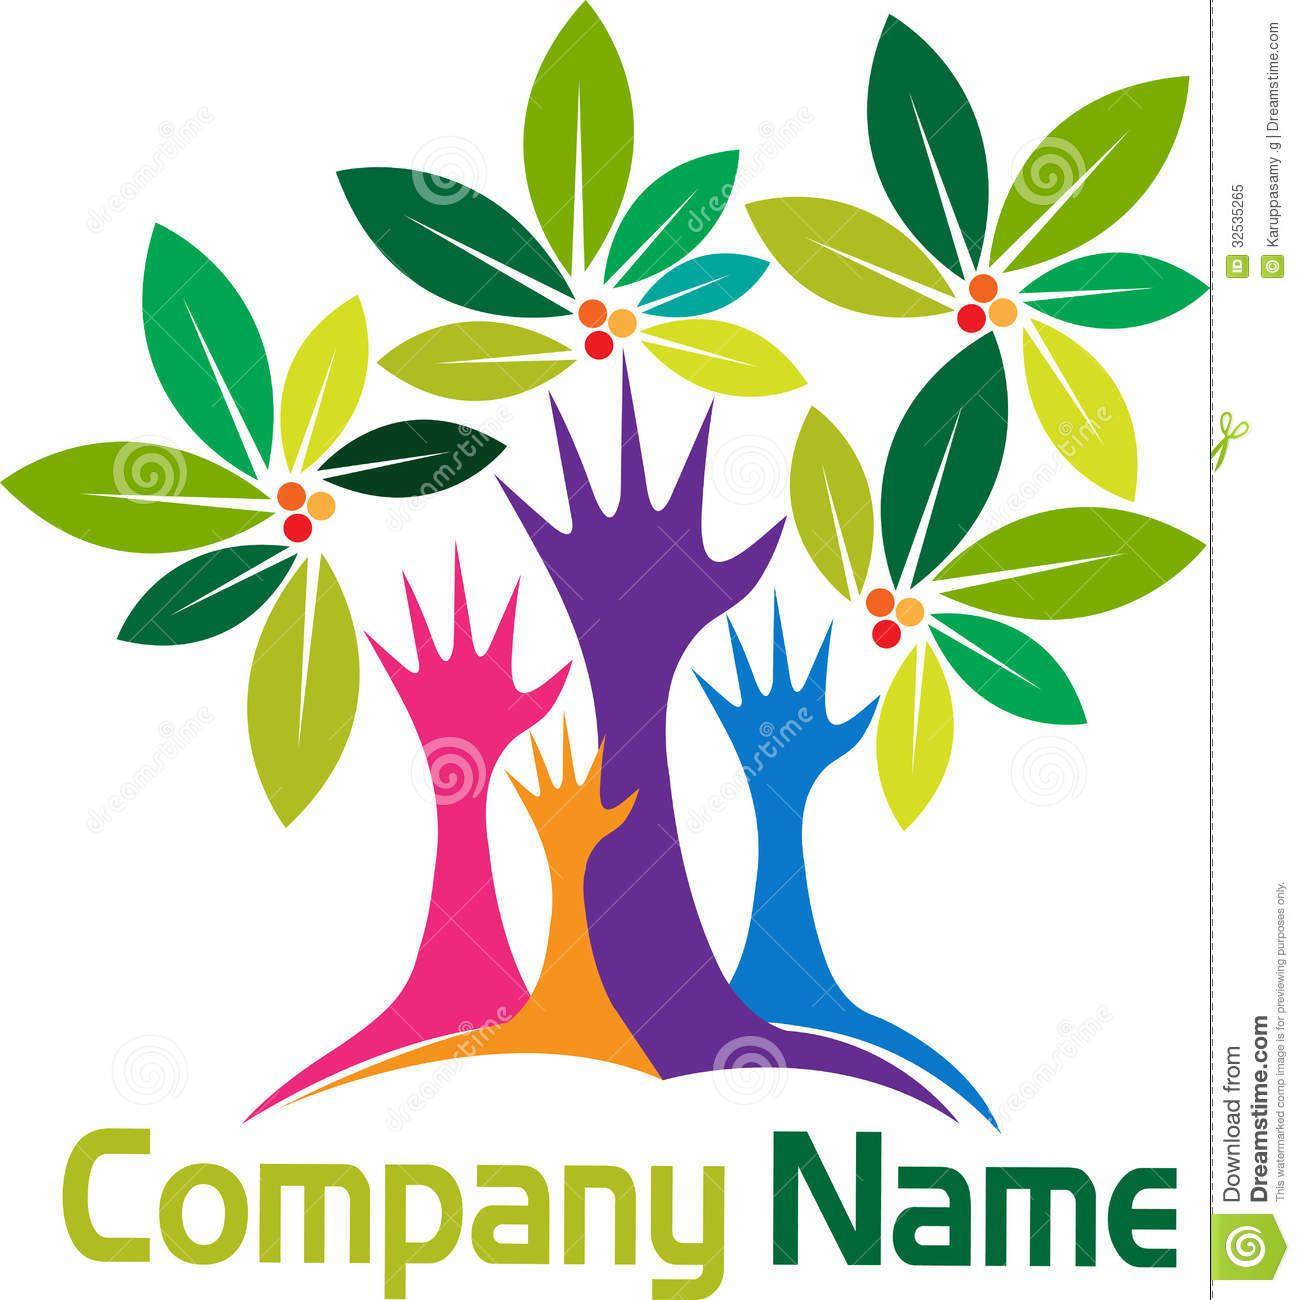 Non-Copyrighted Logo - Non Copyrighted Drawings. Illustration Art Of A Hands Tree Logo